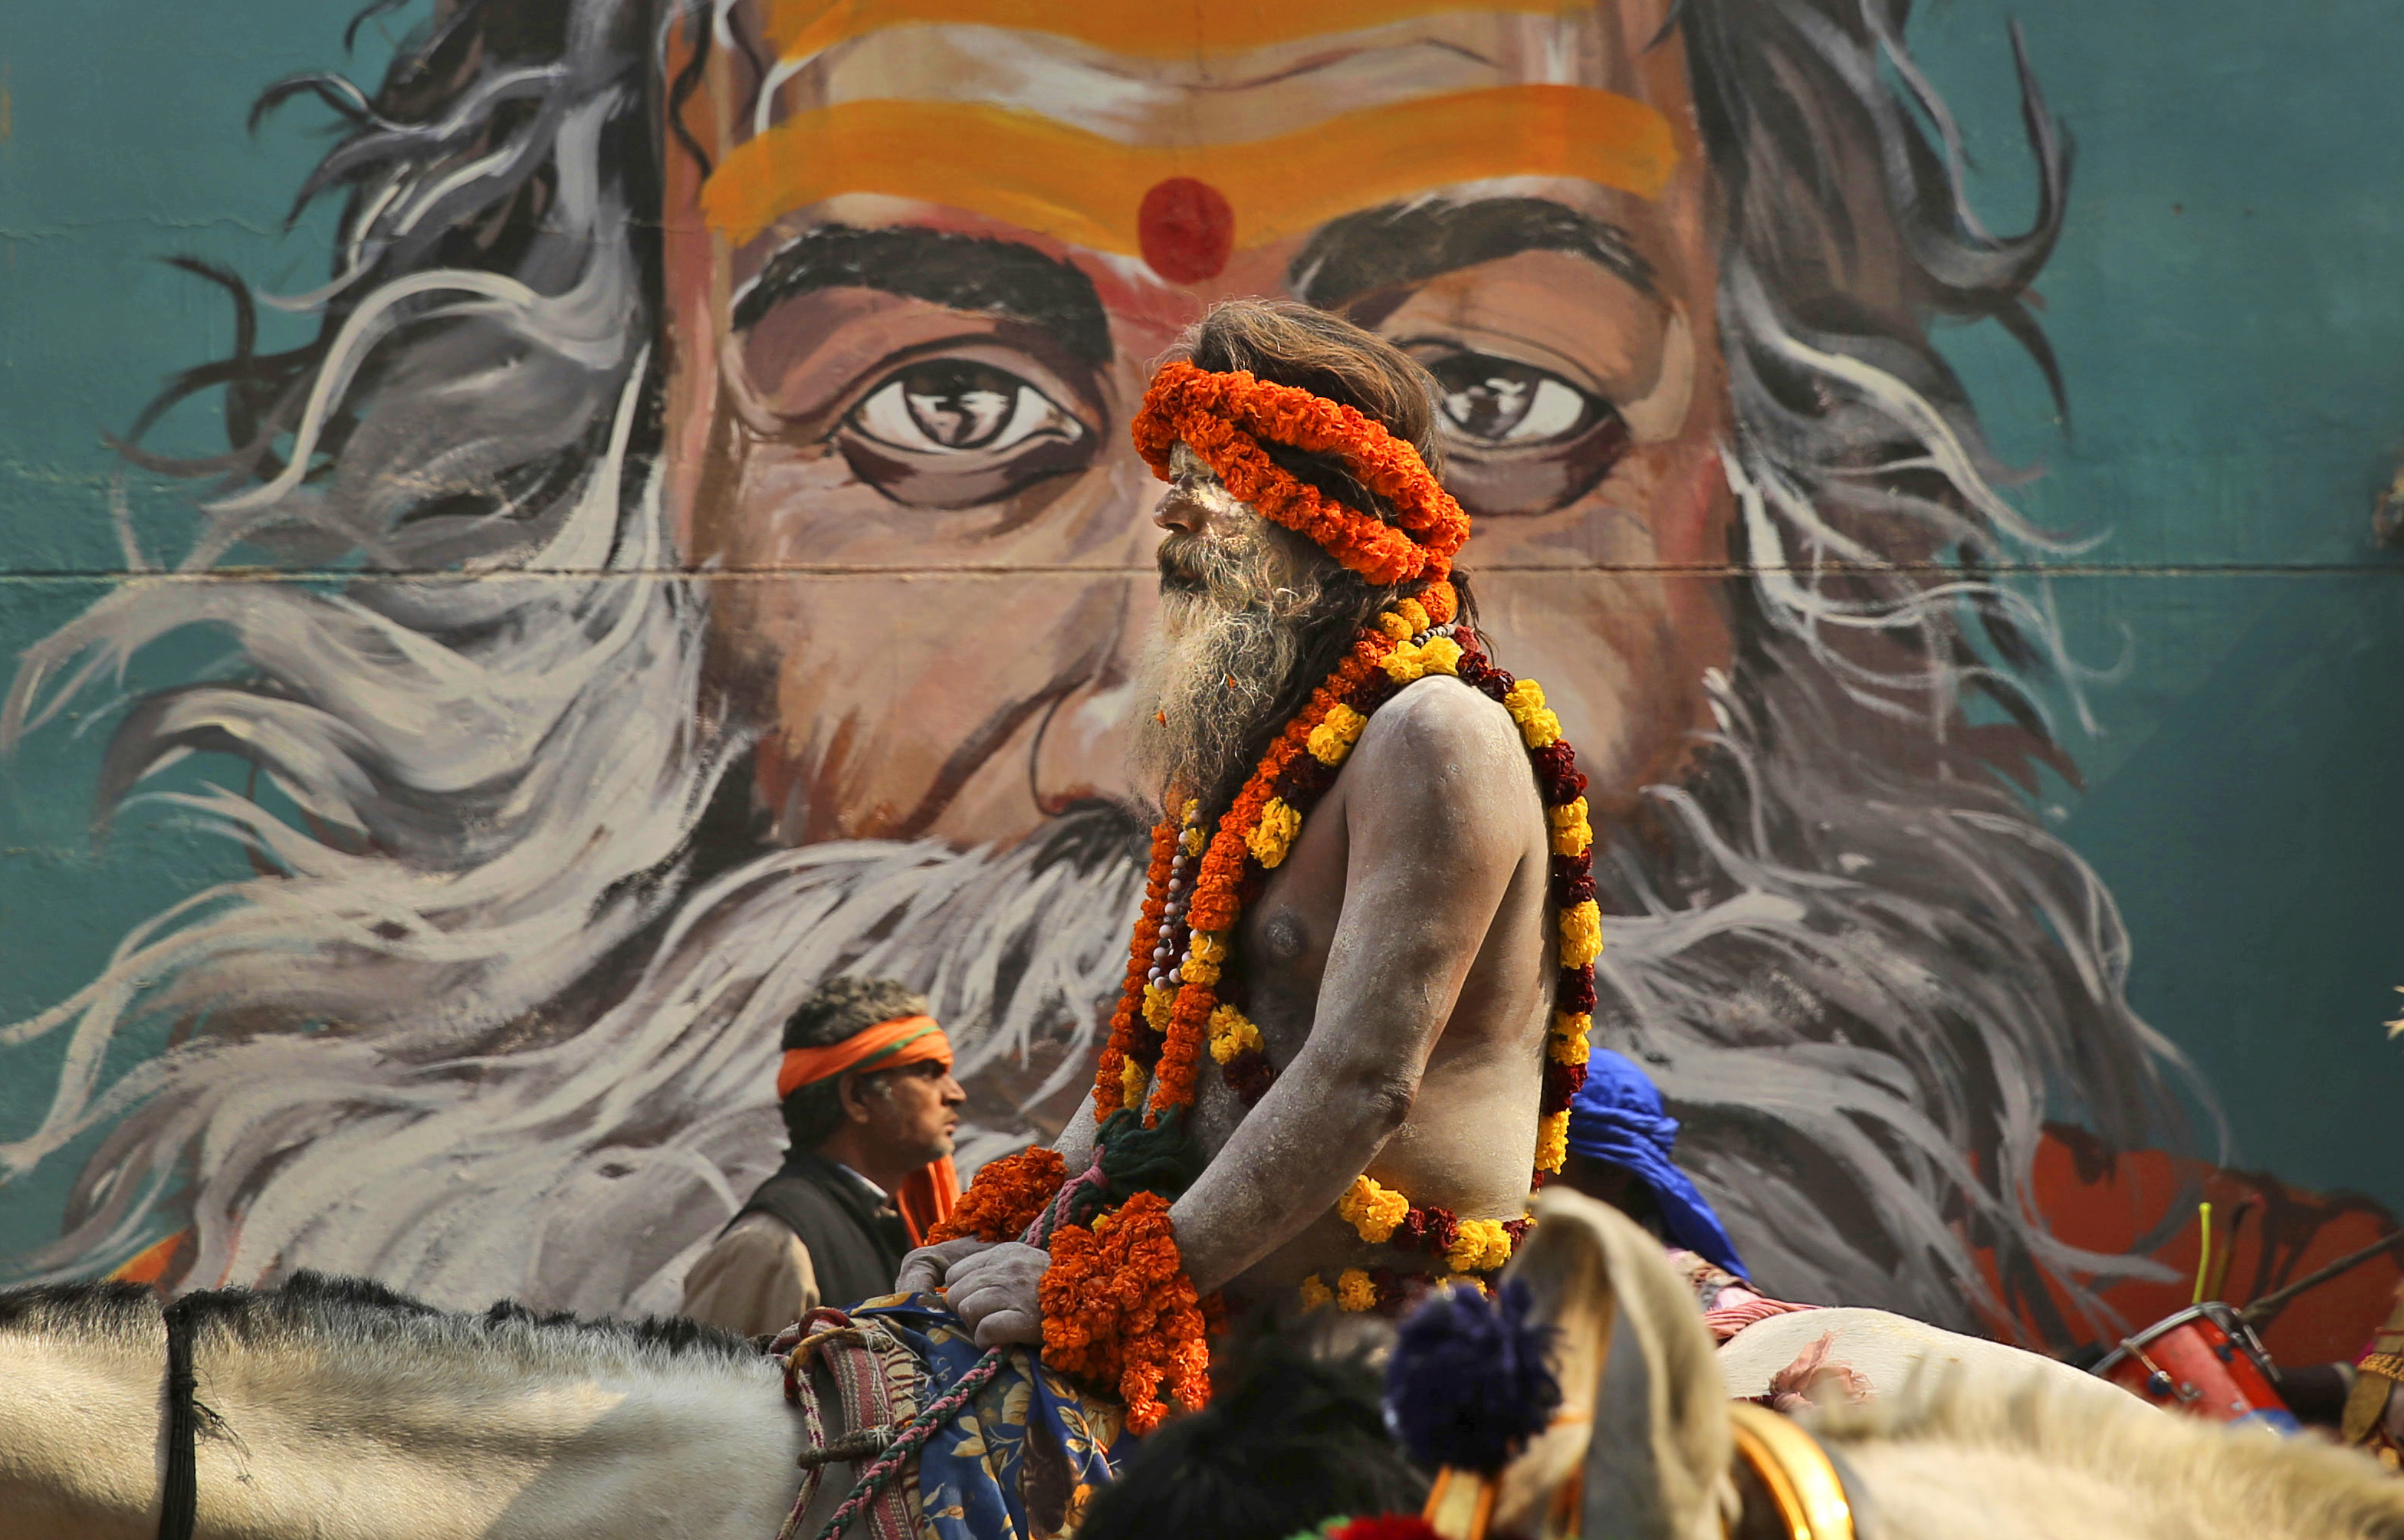 A horse mounted Naga Sadhu, or a naked Hindu holy man rides during a religious procession towards the Sangam, the confluence of rivers Ganges, Yamuna and mythical Saraswati, as part of the Kumbh festival in Allahabad - AP